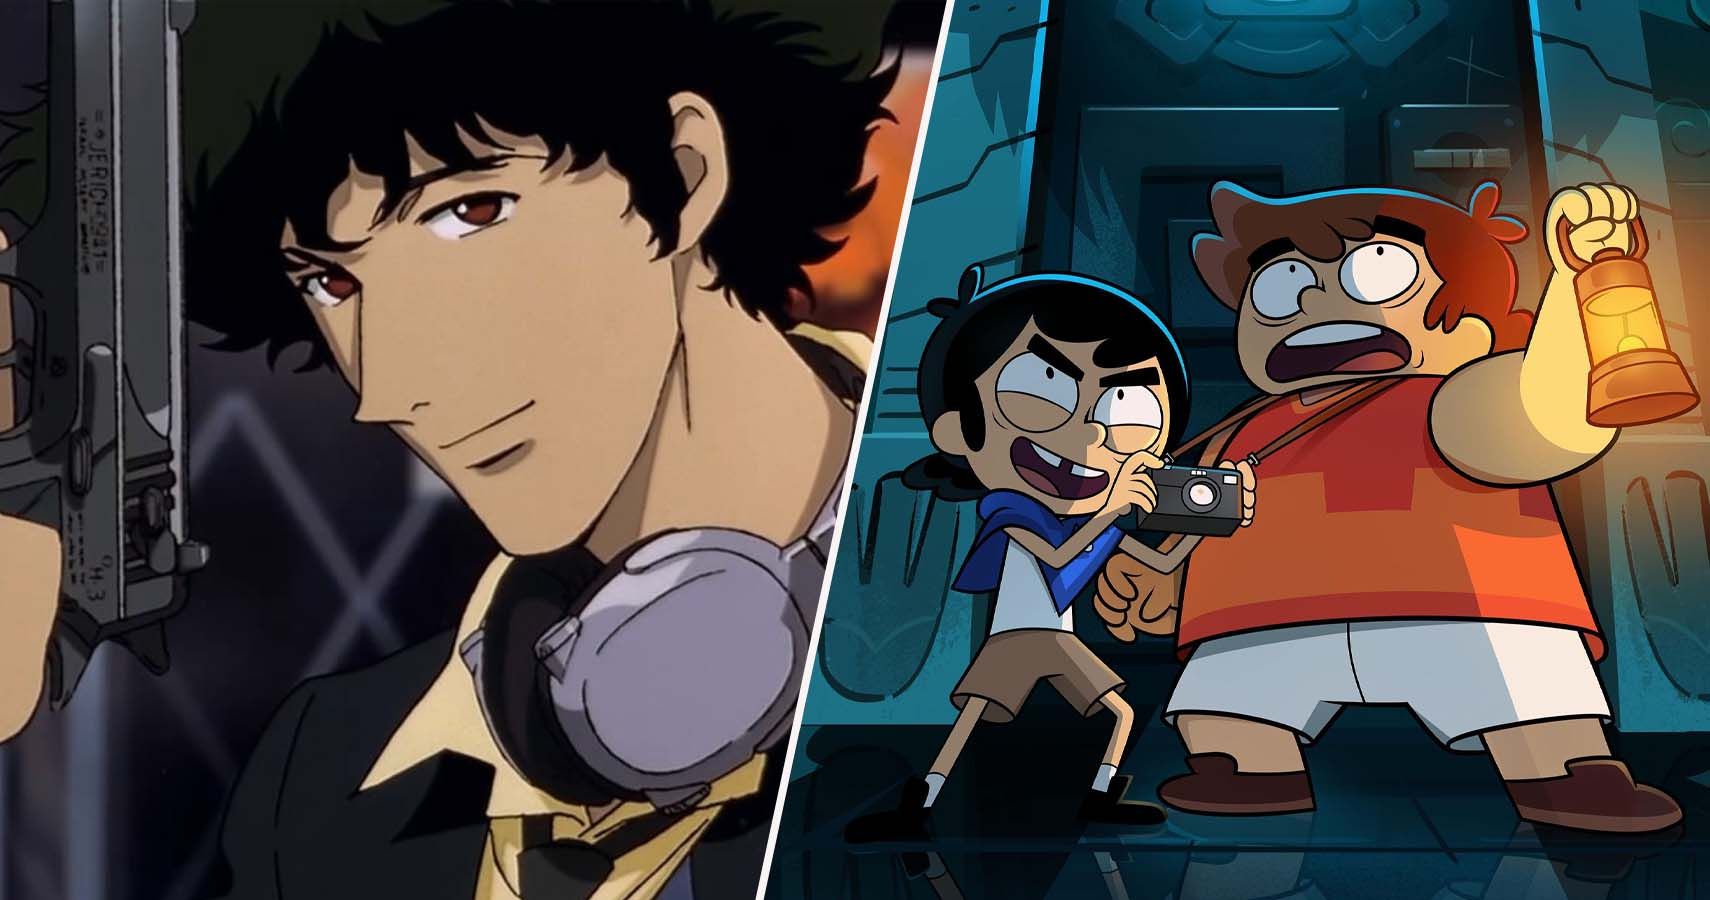 Cowboy Bebop 7 Other Shows & Movies It Influenced featured image